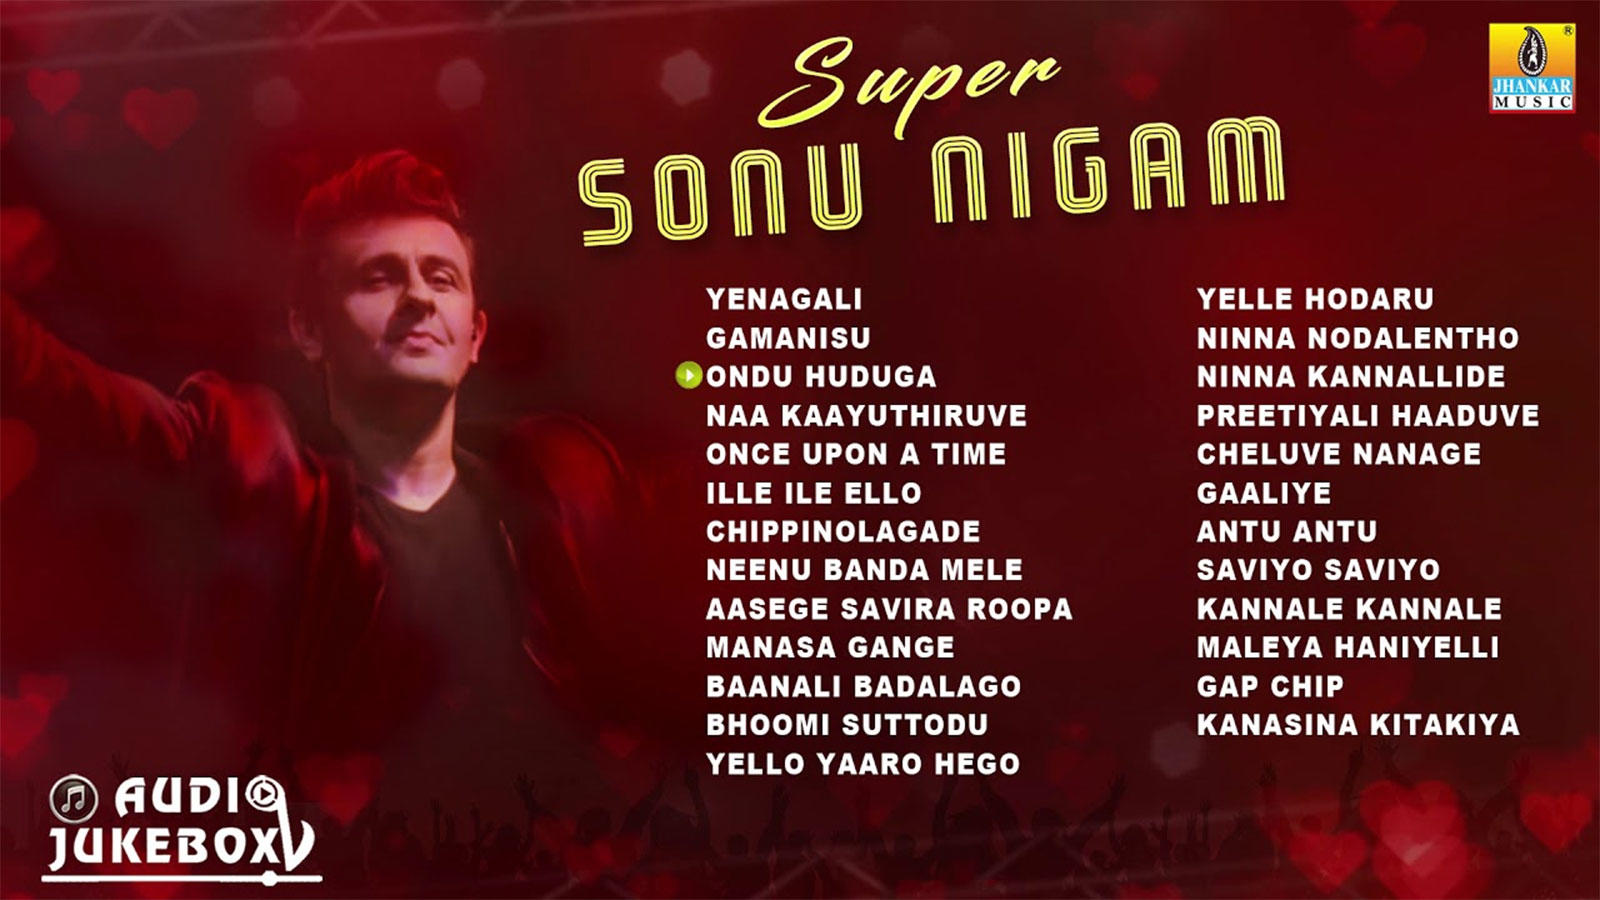 Check Out Latest Kannada Hit Music Audio Song Jukebox Of Sonu Nigam Kannada Video Songs Times Of India Musixmatch for spotify and apple music is now available. check out latest kannada hit music audio song jukebox of sonu nigam